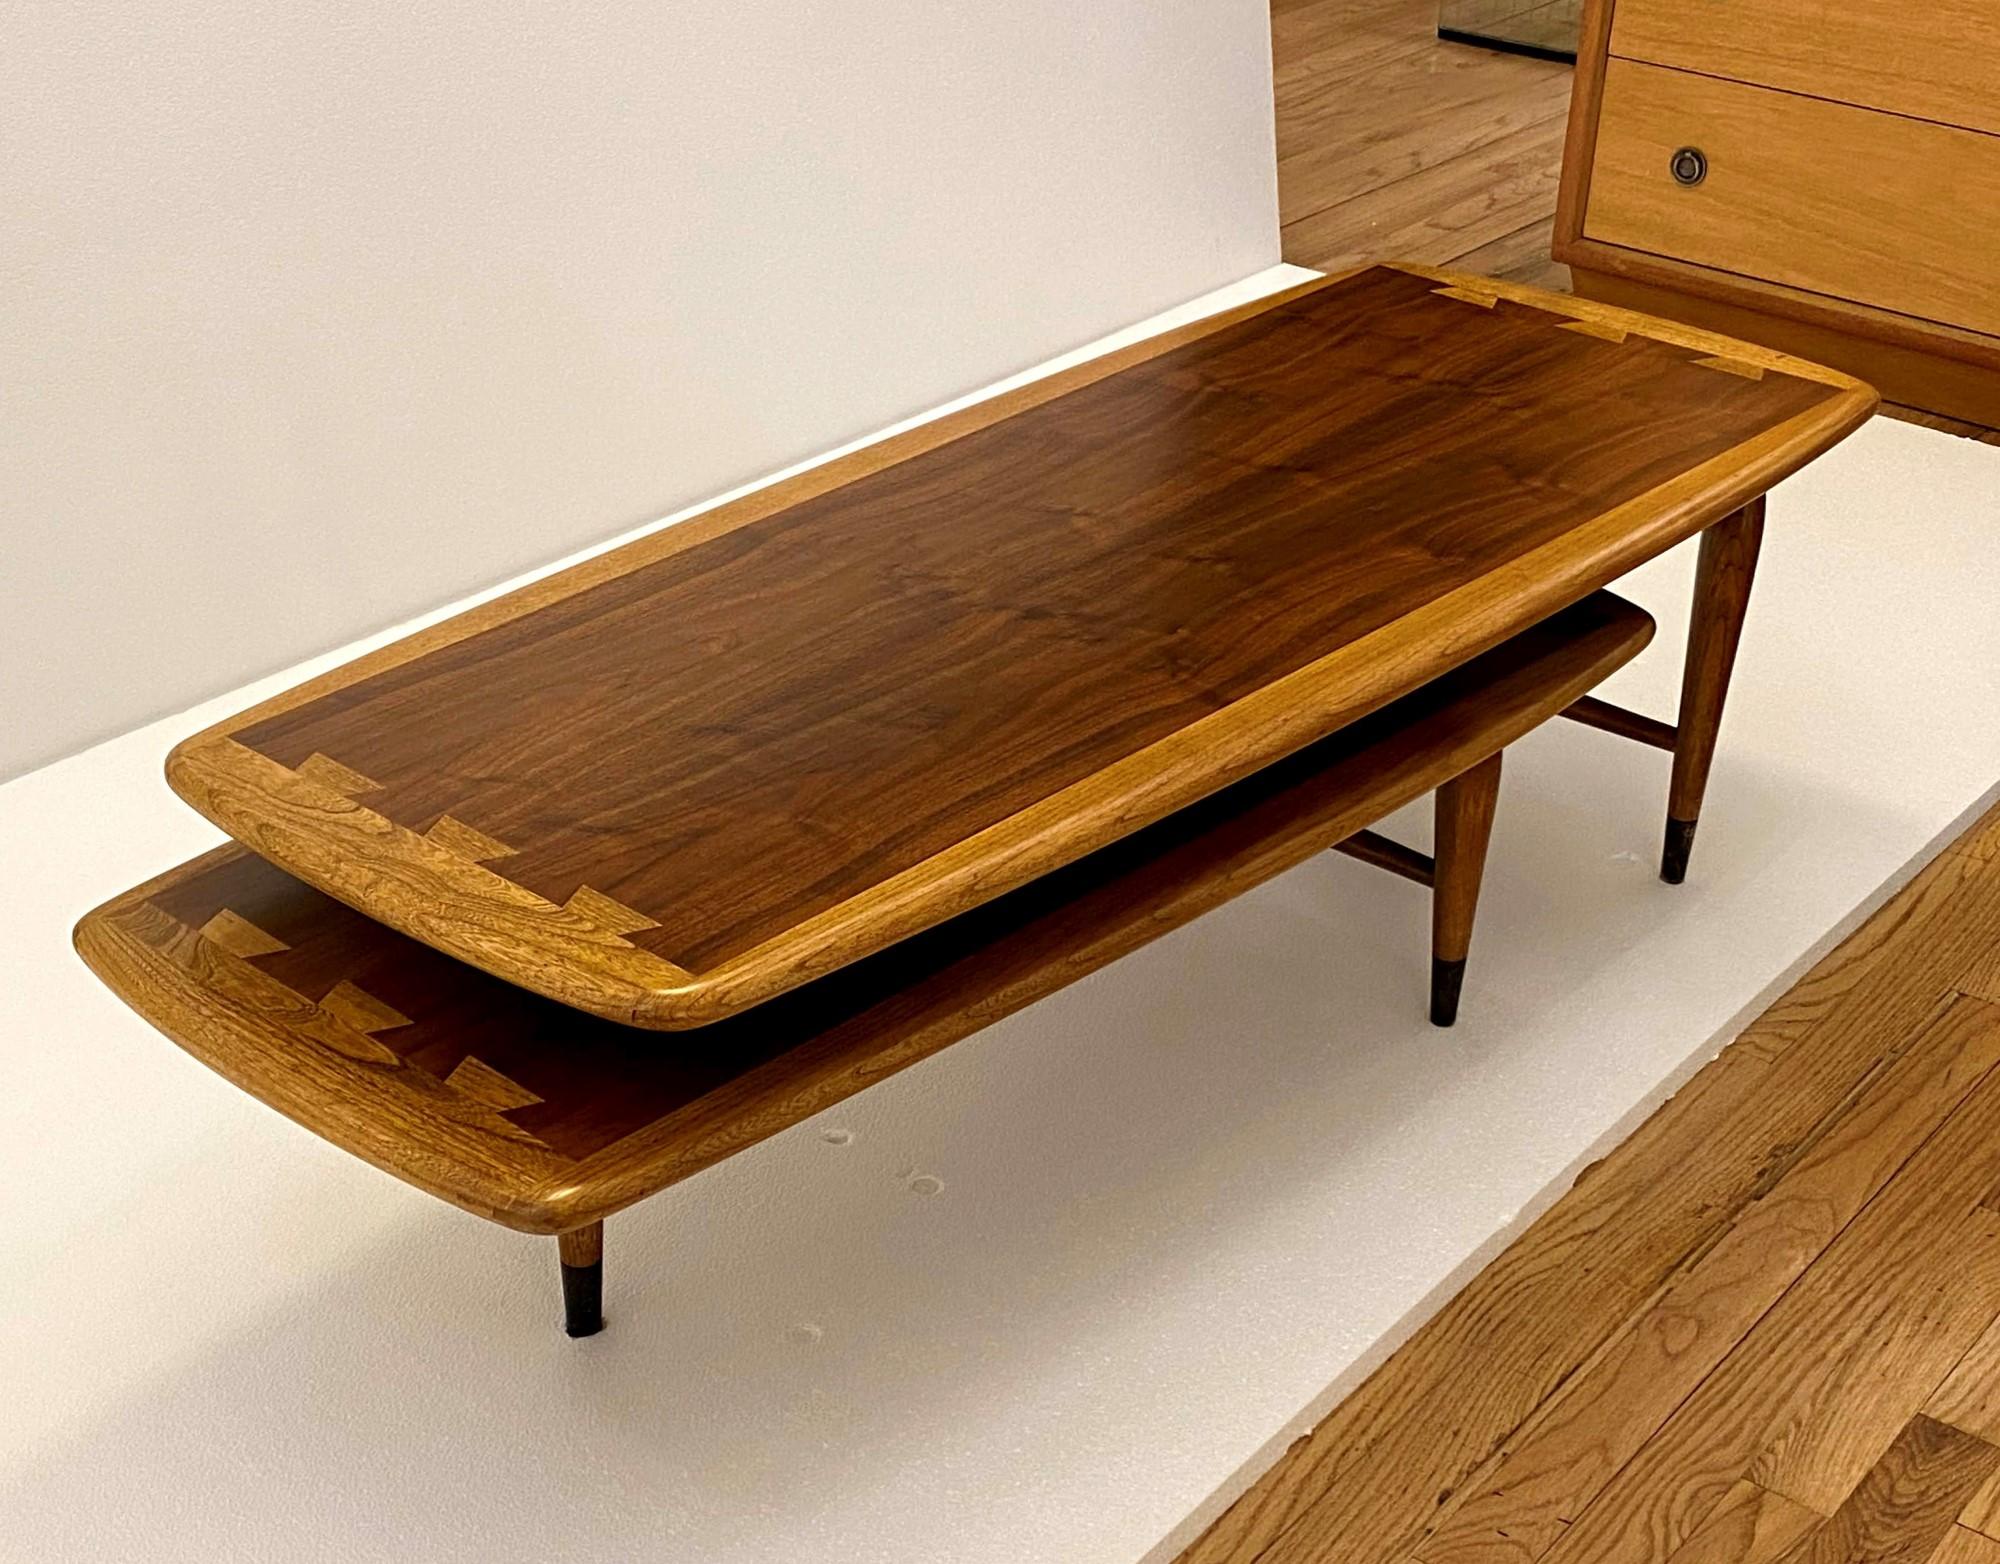 1960s Mid-Century Modern Lane Switchblade coffee table. From their highly successful Acclaim series designed by Andre Bus, this adjustable two-piece table is made out of dark tone walnut and light tone hickory woods with an interlocking dovetail